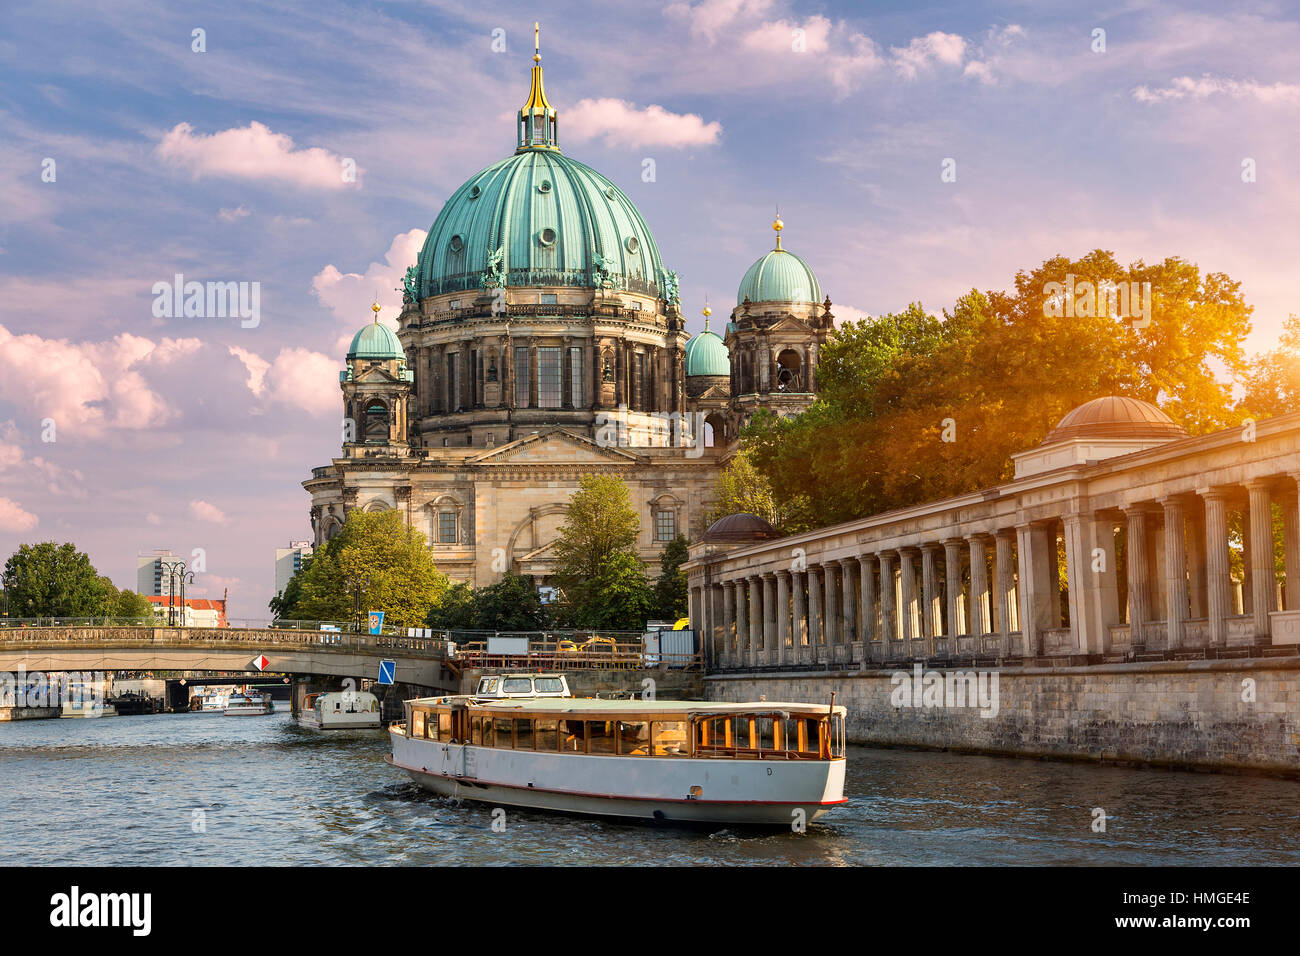 Berkin, Tour boat on Spree River with cathedral in Background Stock Photo